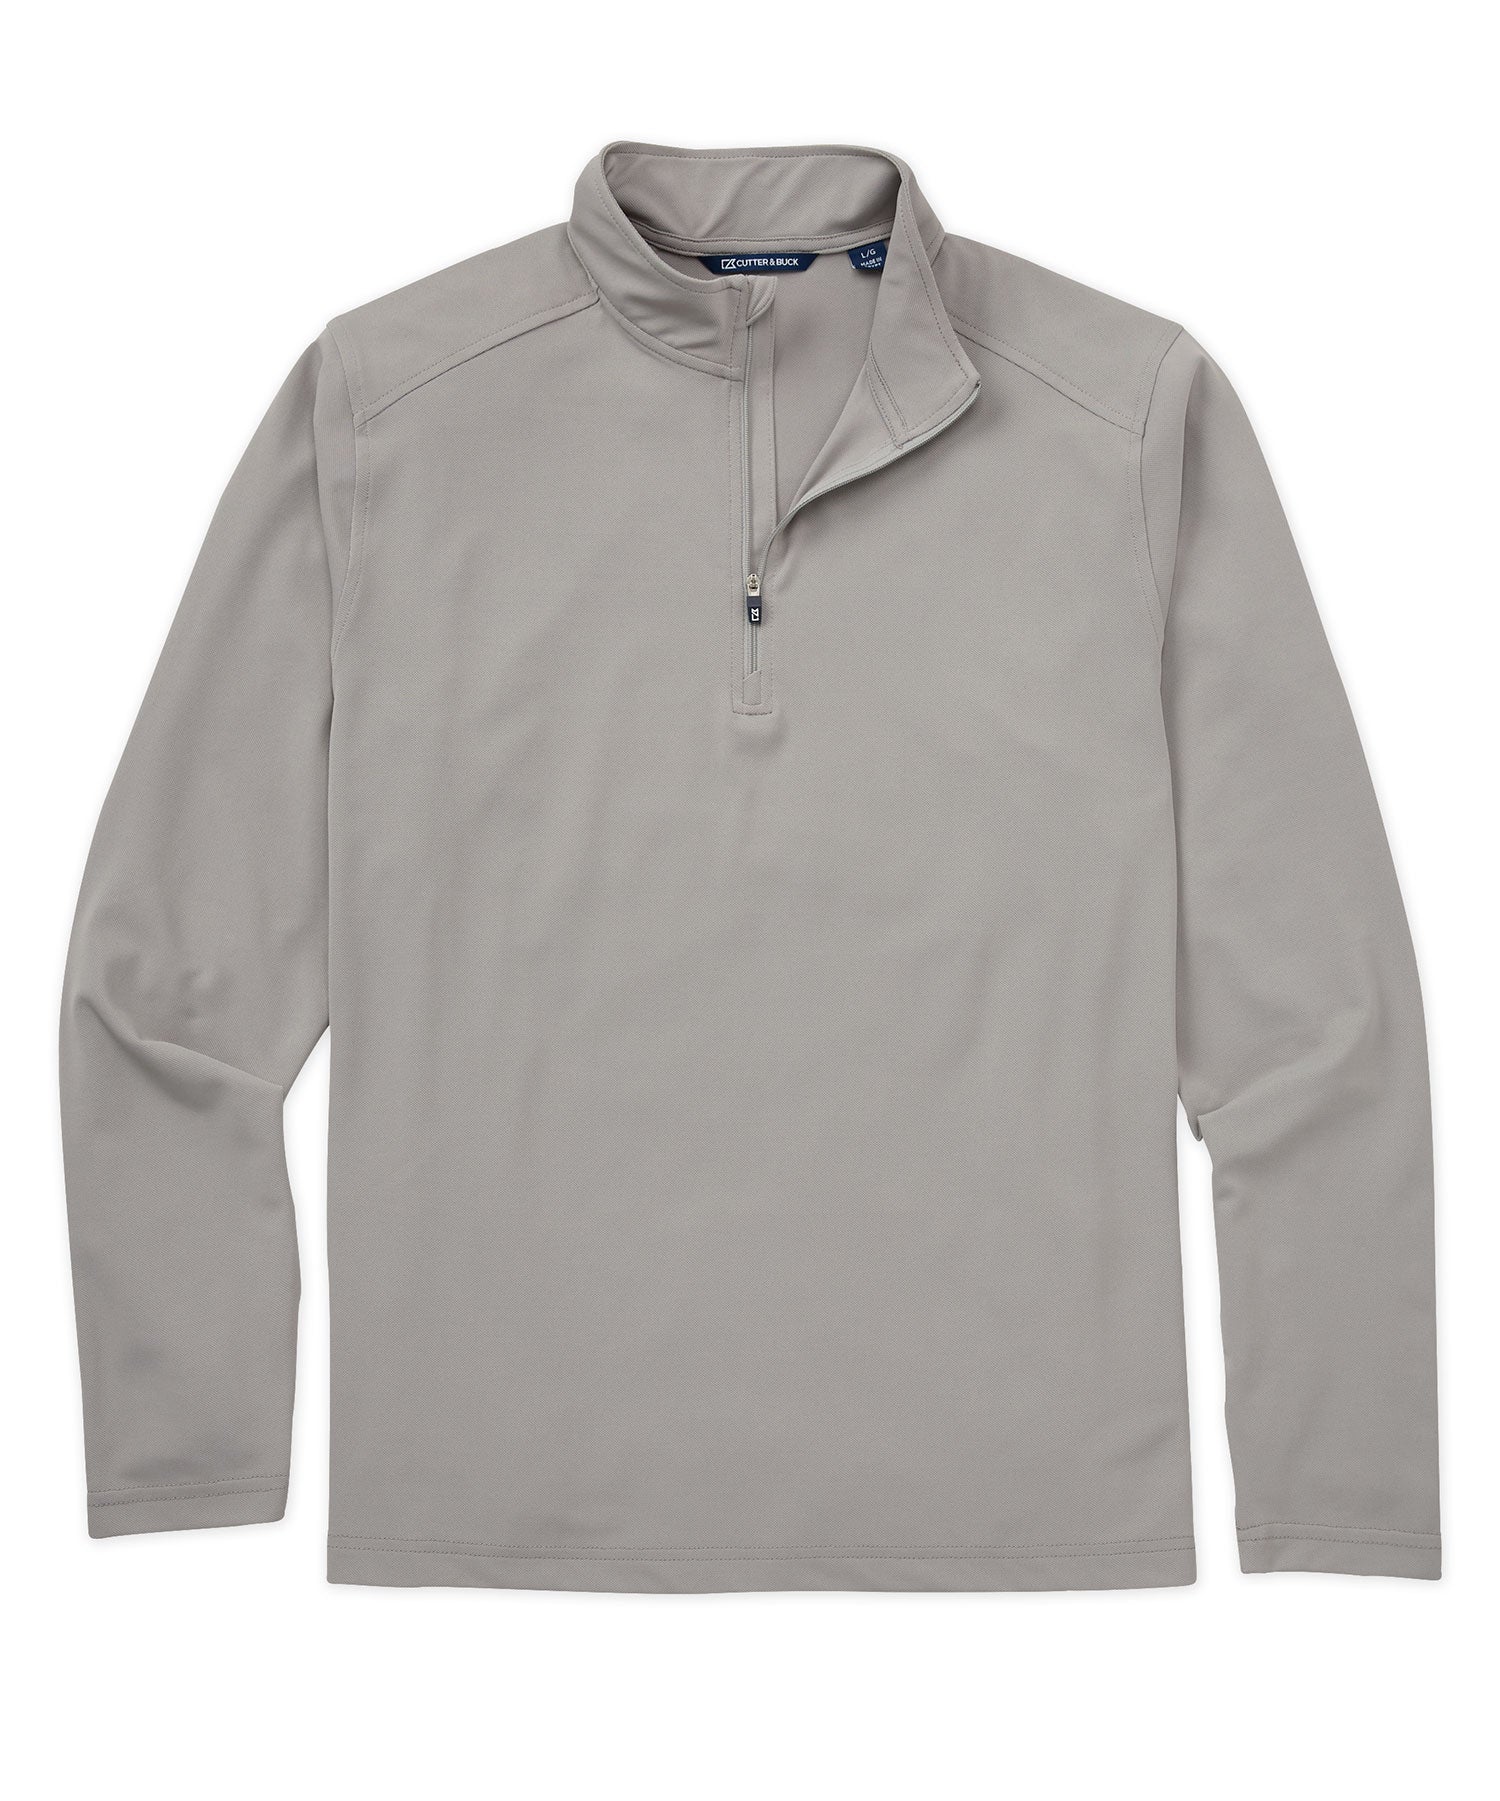 Cutter & Buck Virtue Eco Pique Recycled Quarter Zip Pullover